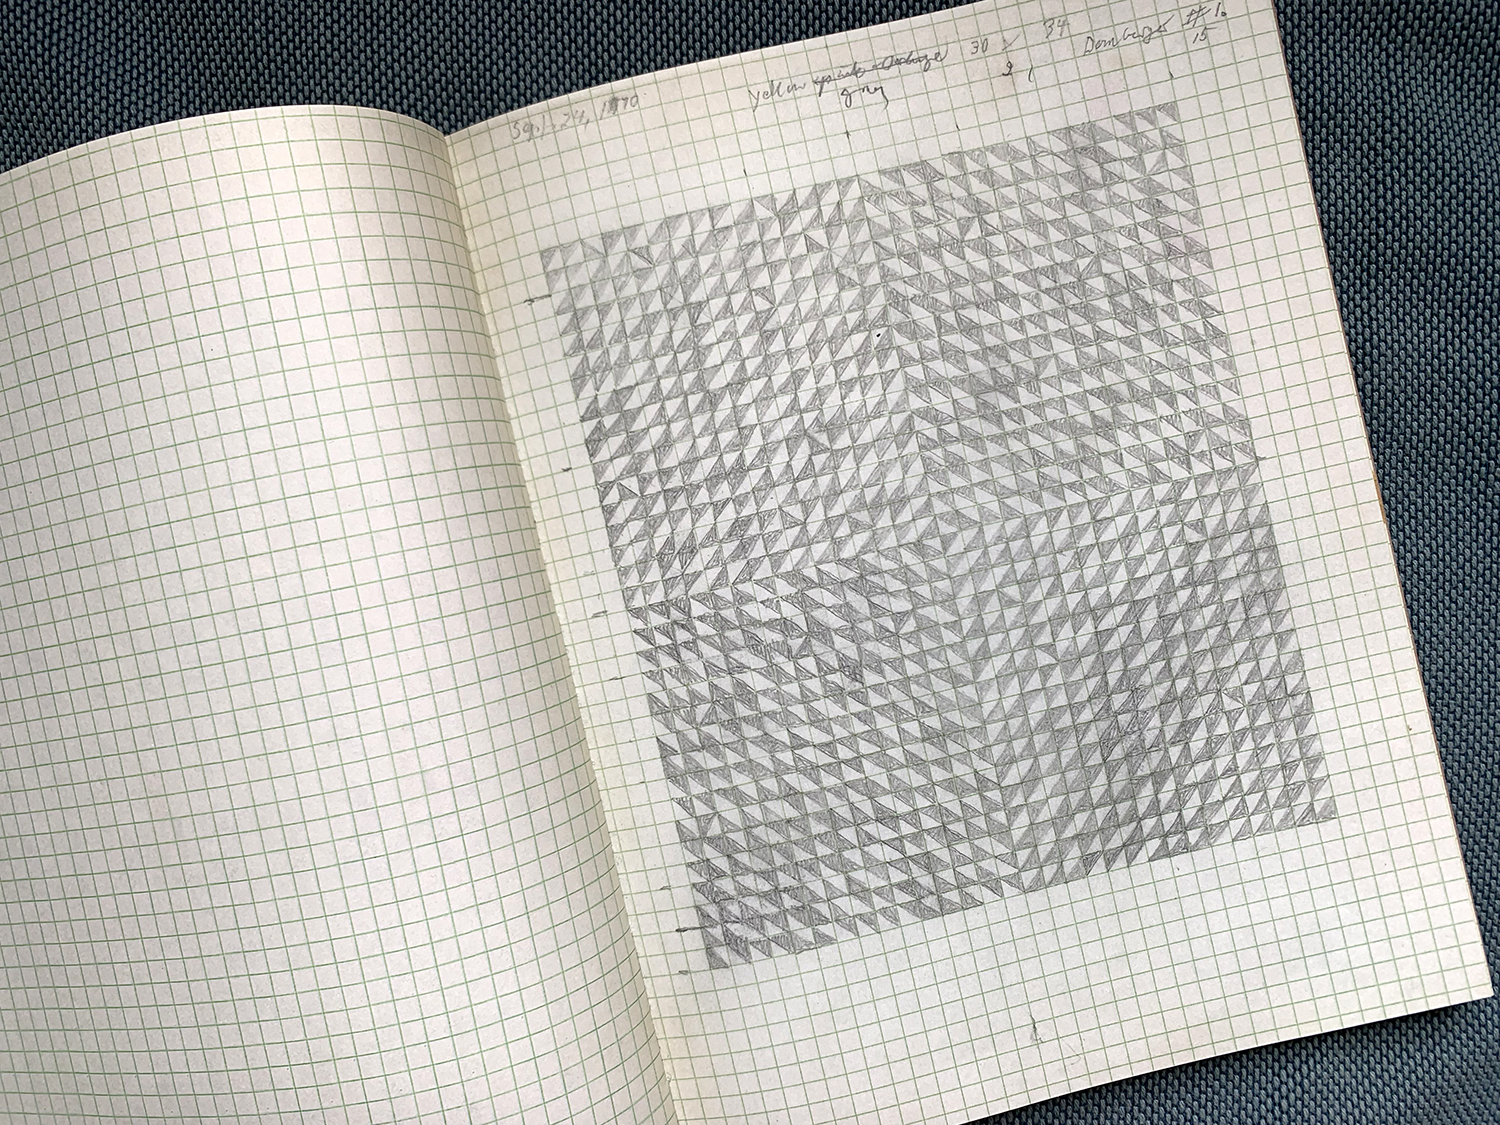  Original drawing by Anni Albers. Published in Anni Albers Notebook 1970 - 1980. David Zwirner Books.  